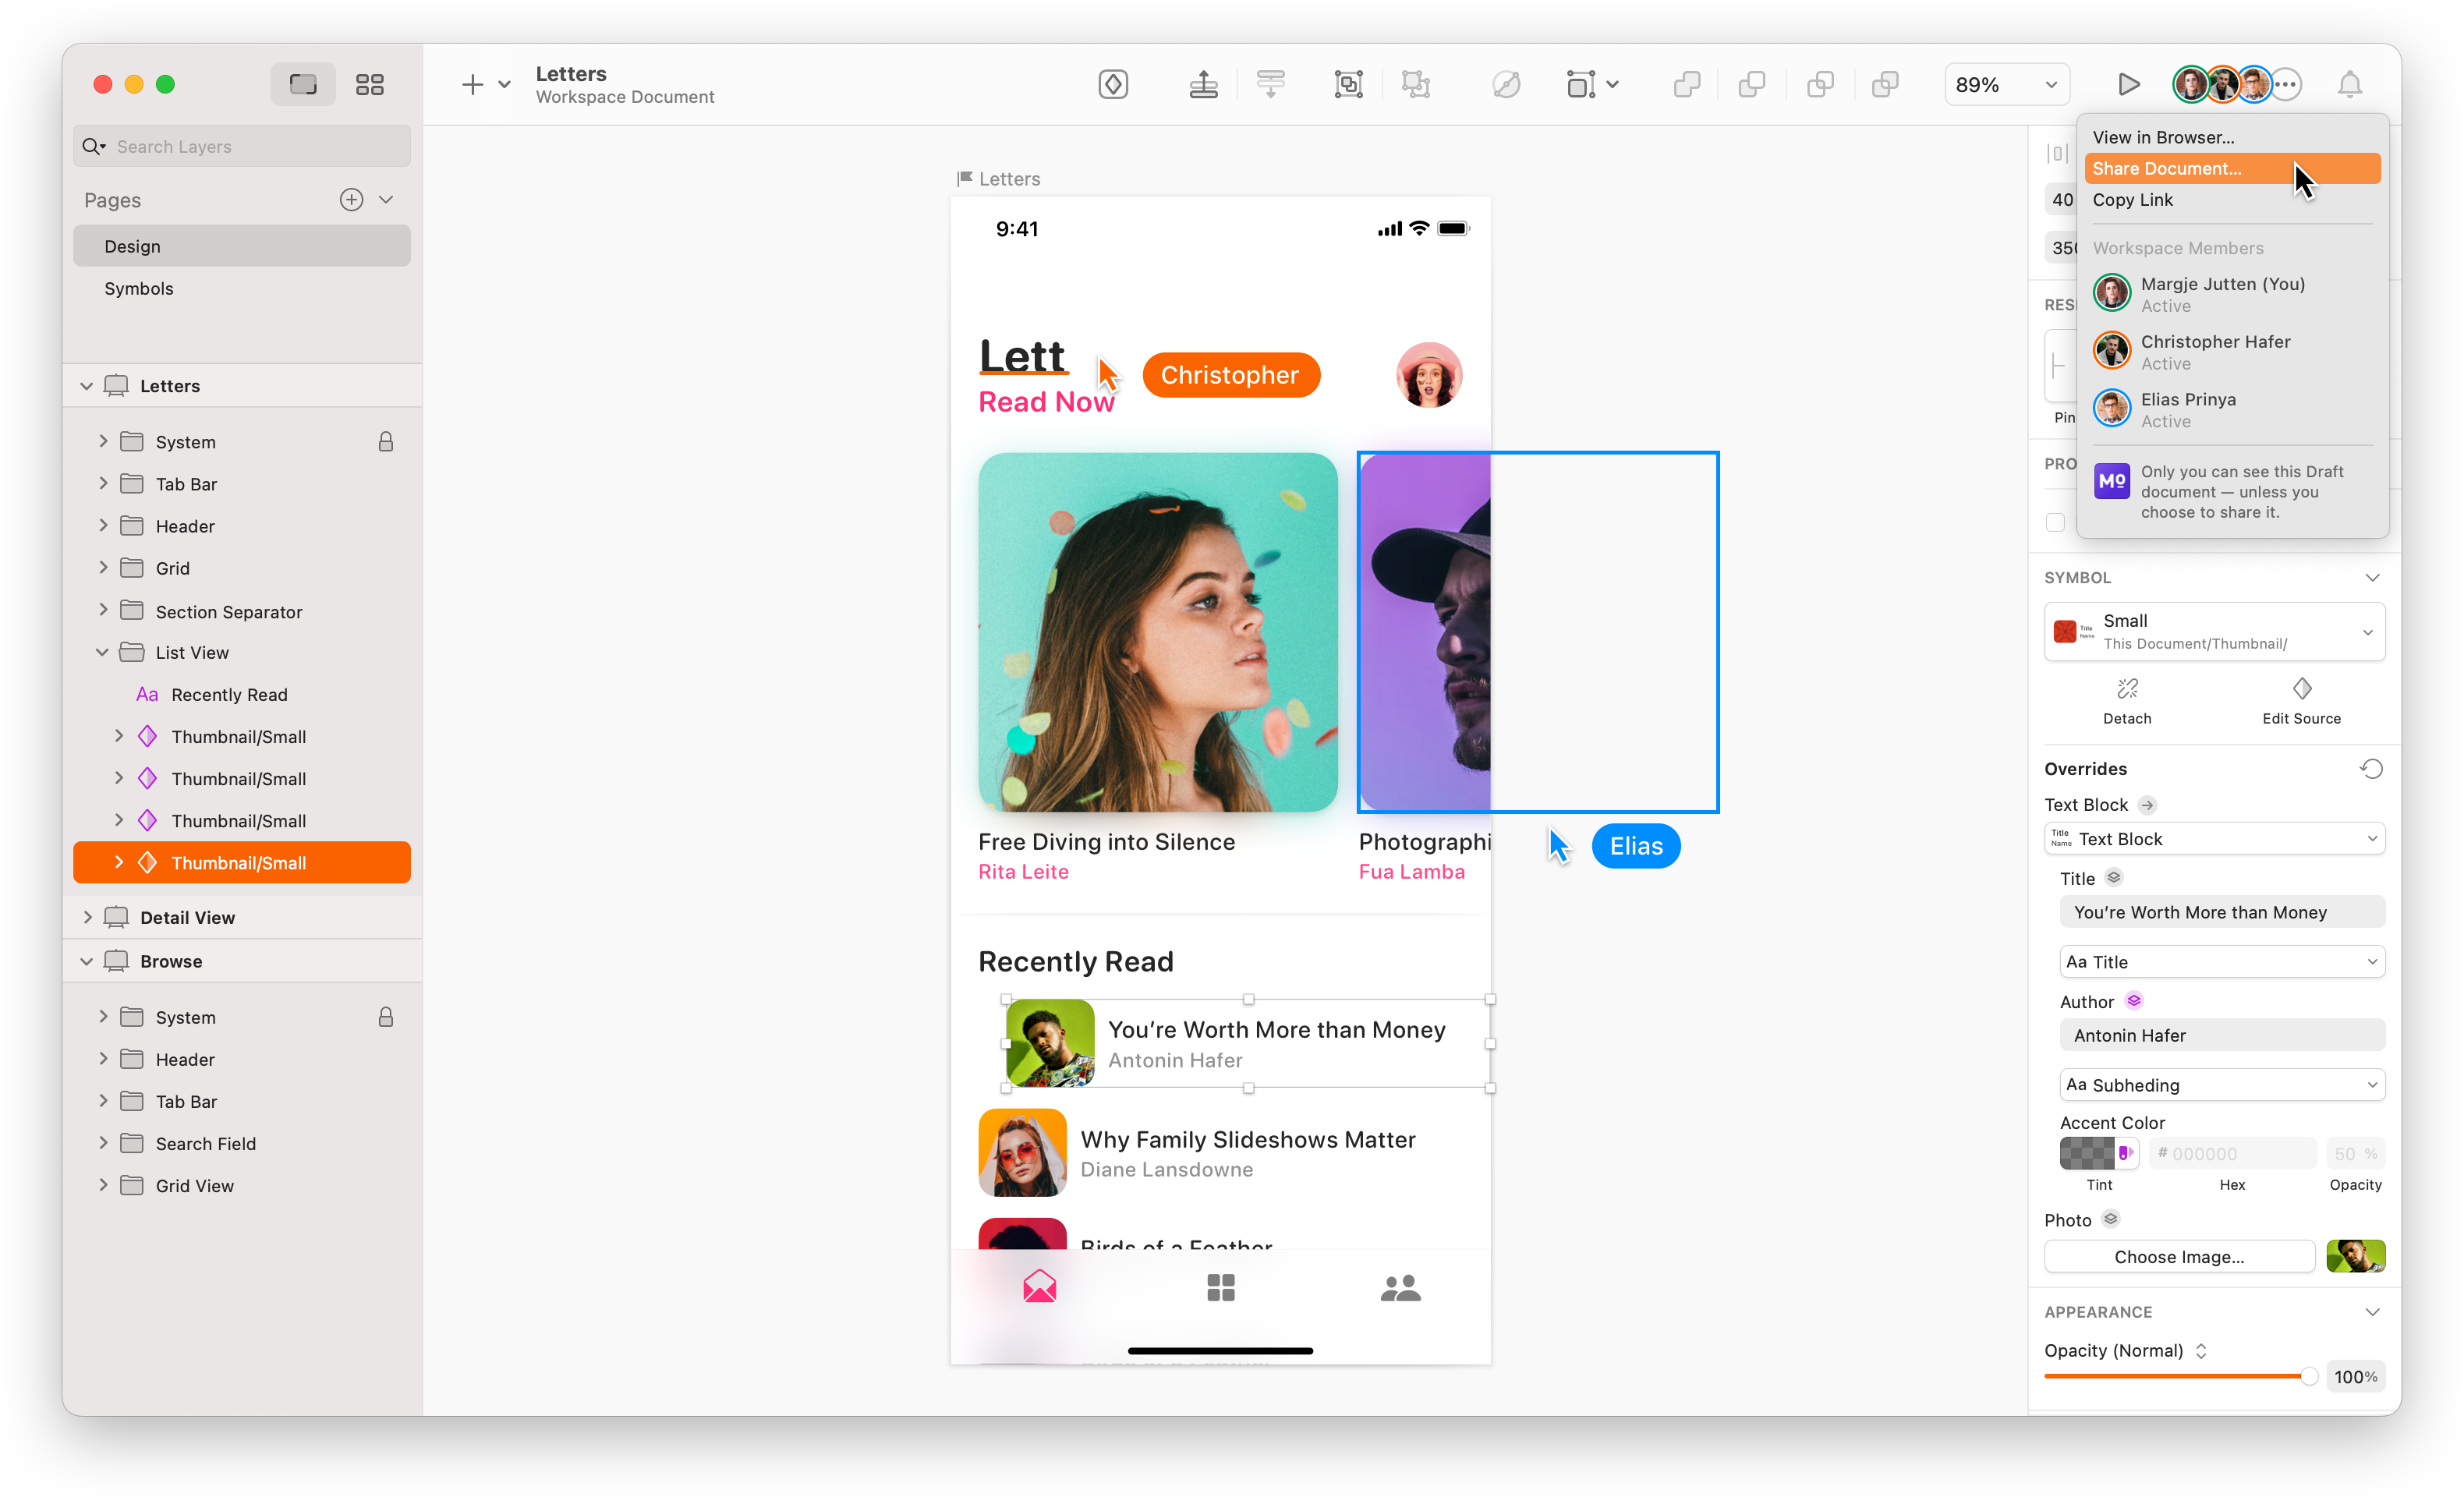 8 Best Prototyping Tools to Use with Sketch  by Annie Dai  Design  Sketch   Medium